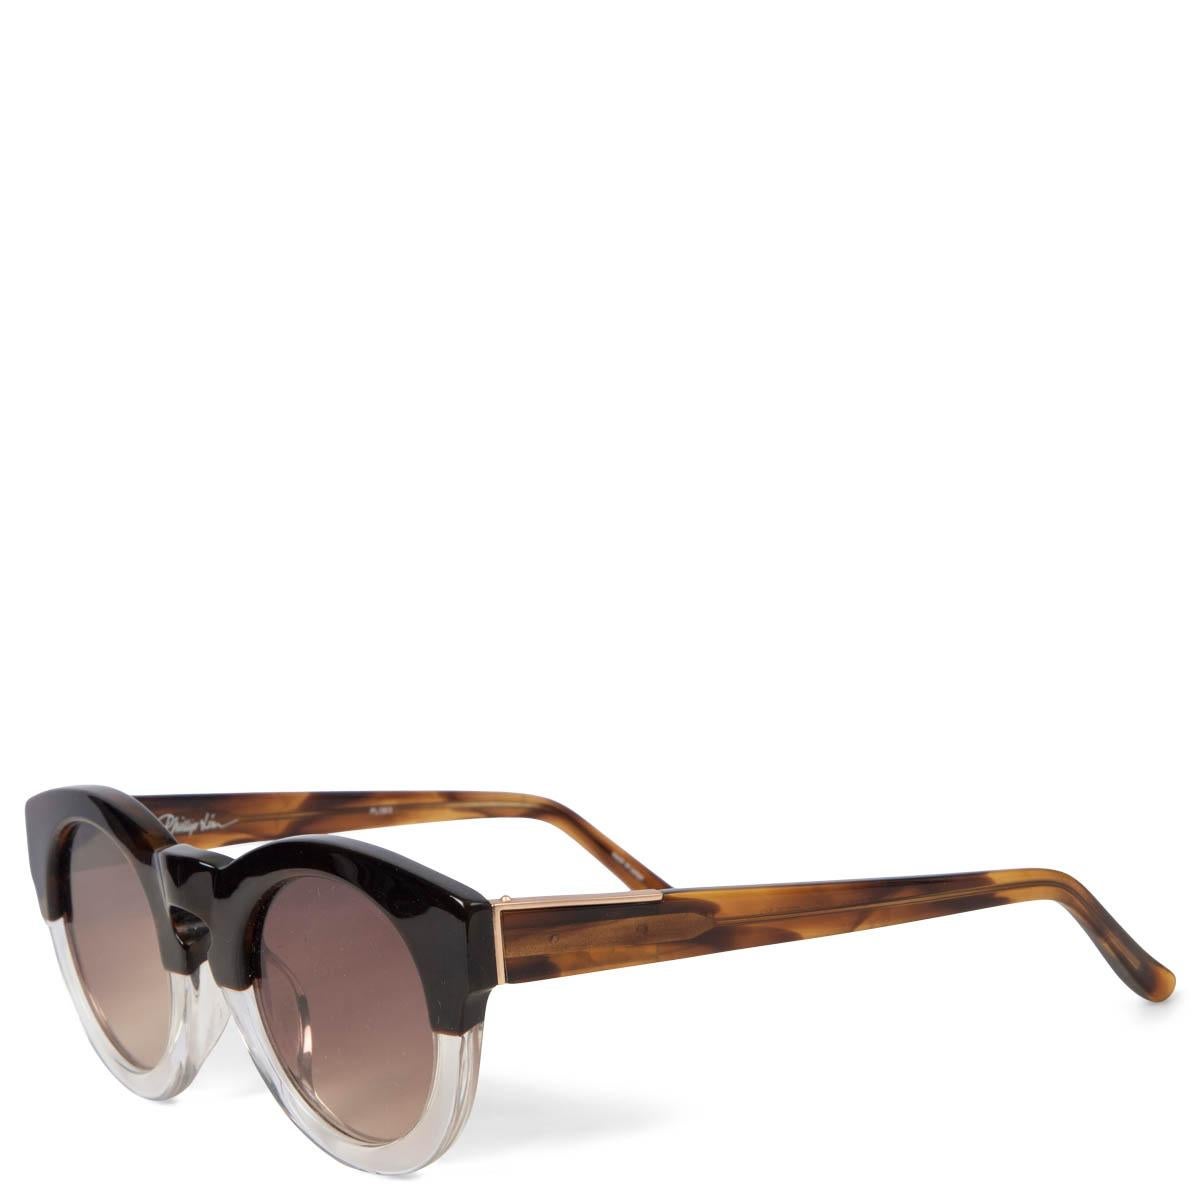 100% authentic 3.1 Phillip Lim Cat3 two-tone sunglasses in black and clear acetate with brown and amber tortoise temples. Have been worn and show some faint scratches on the left lens. Overall in very good condition.

Measurements
Model	Cat3